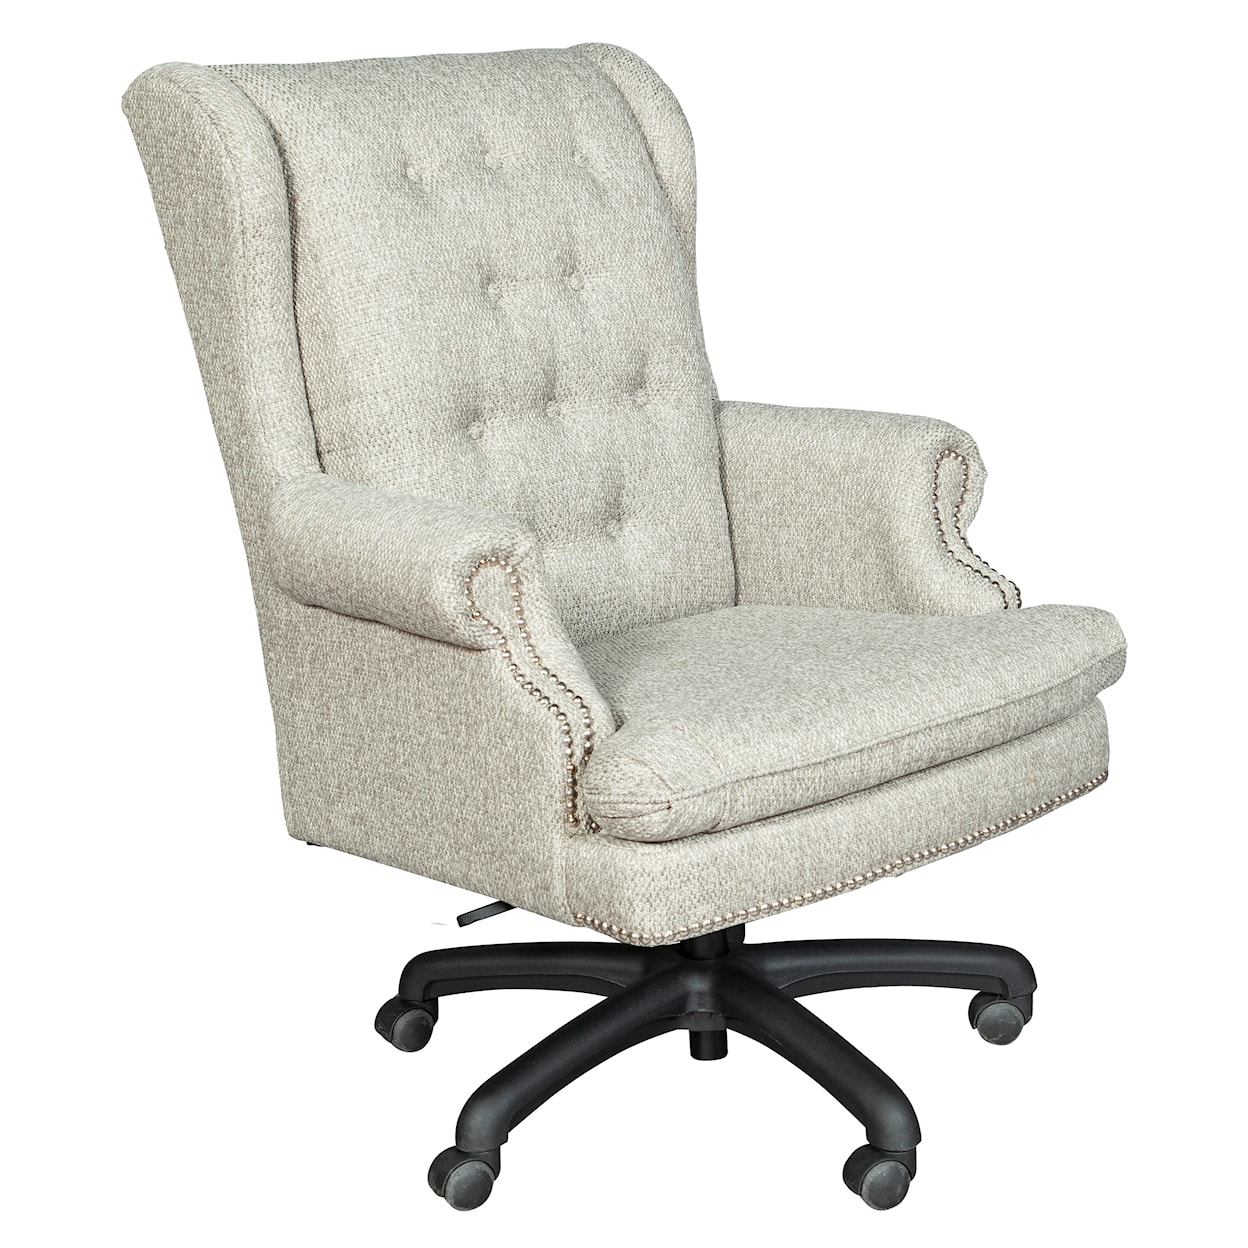 Hekman Upholstery Valencia Office Chair with Buttons